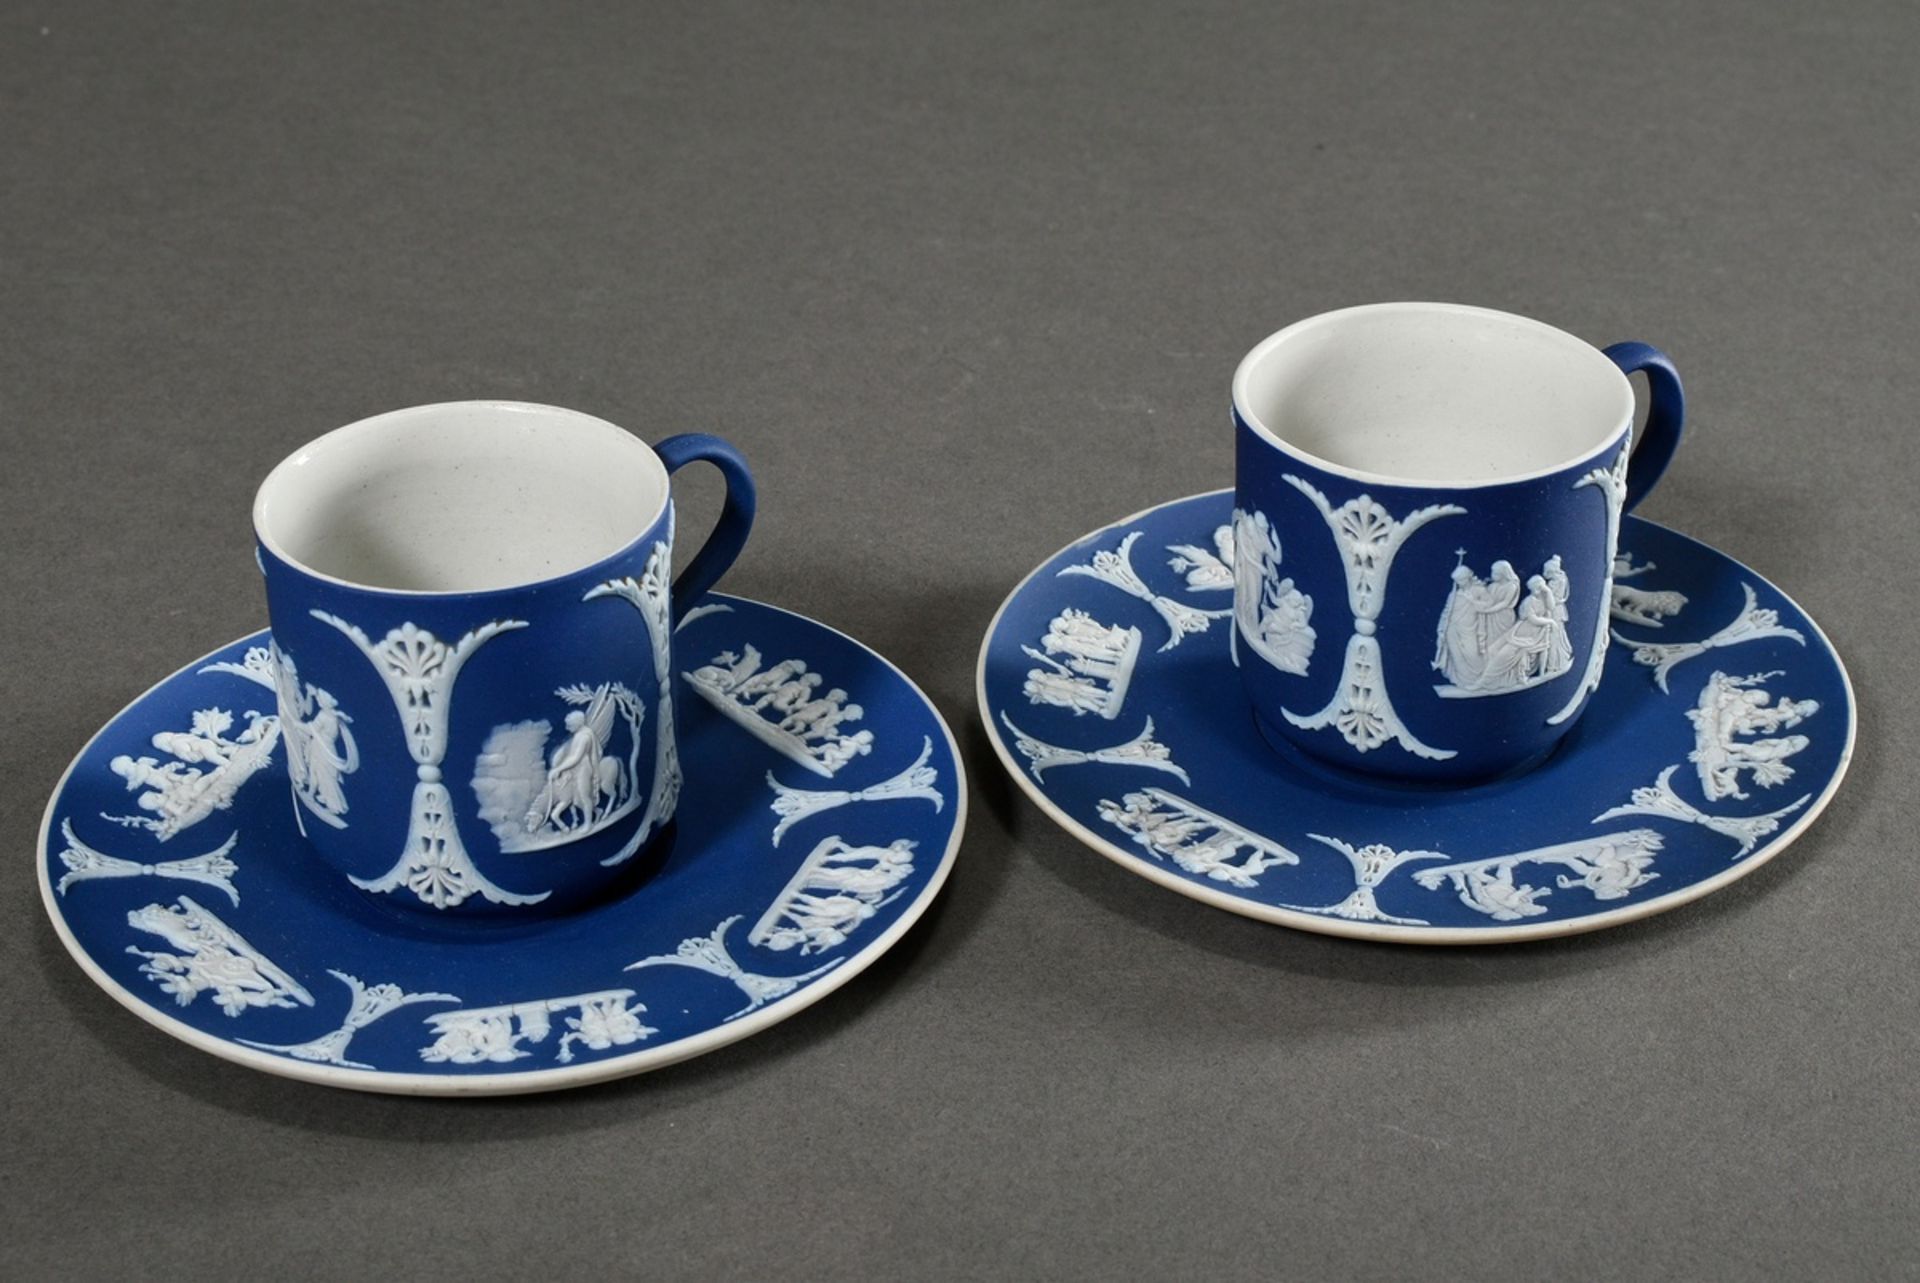 5 Various pieces Wedgwood Tête-à-Tête in blue jasperware with white bisque reliefs, England early 2 - Image 4 of 6